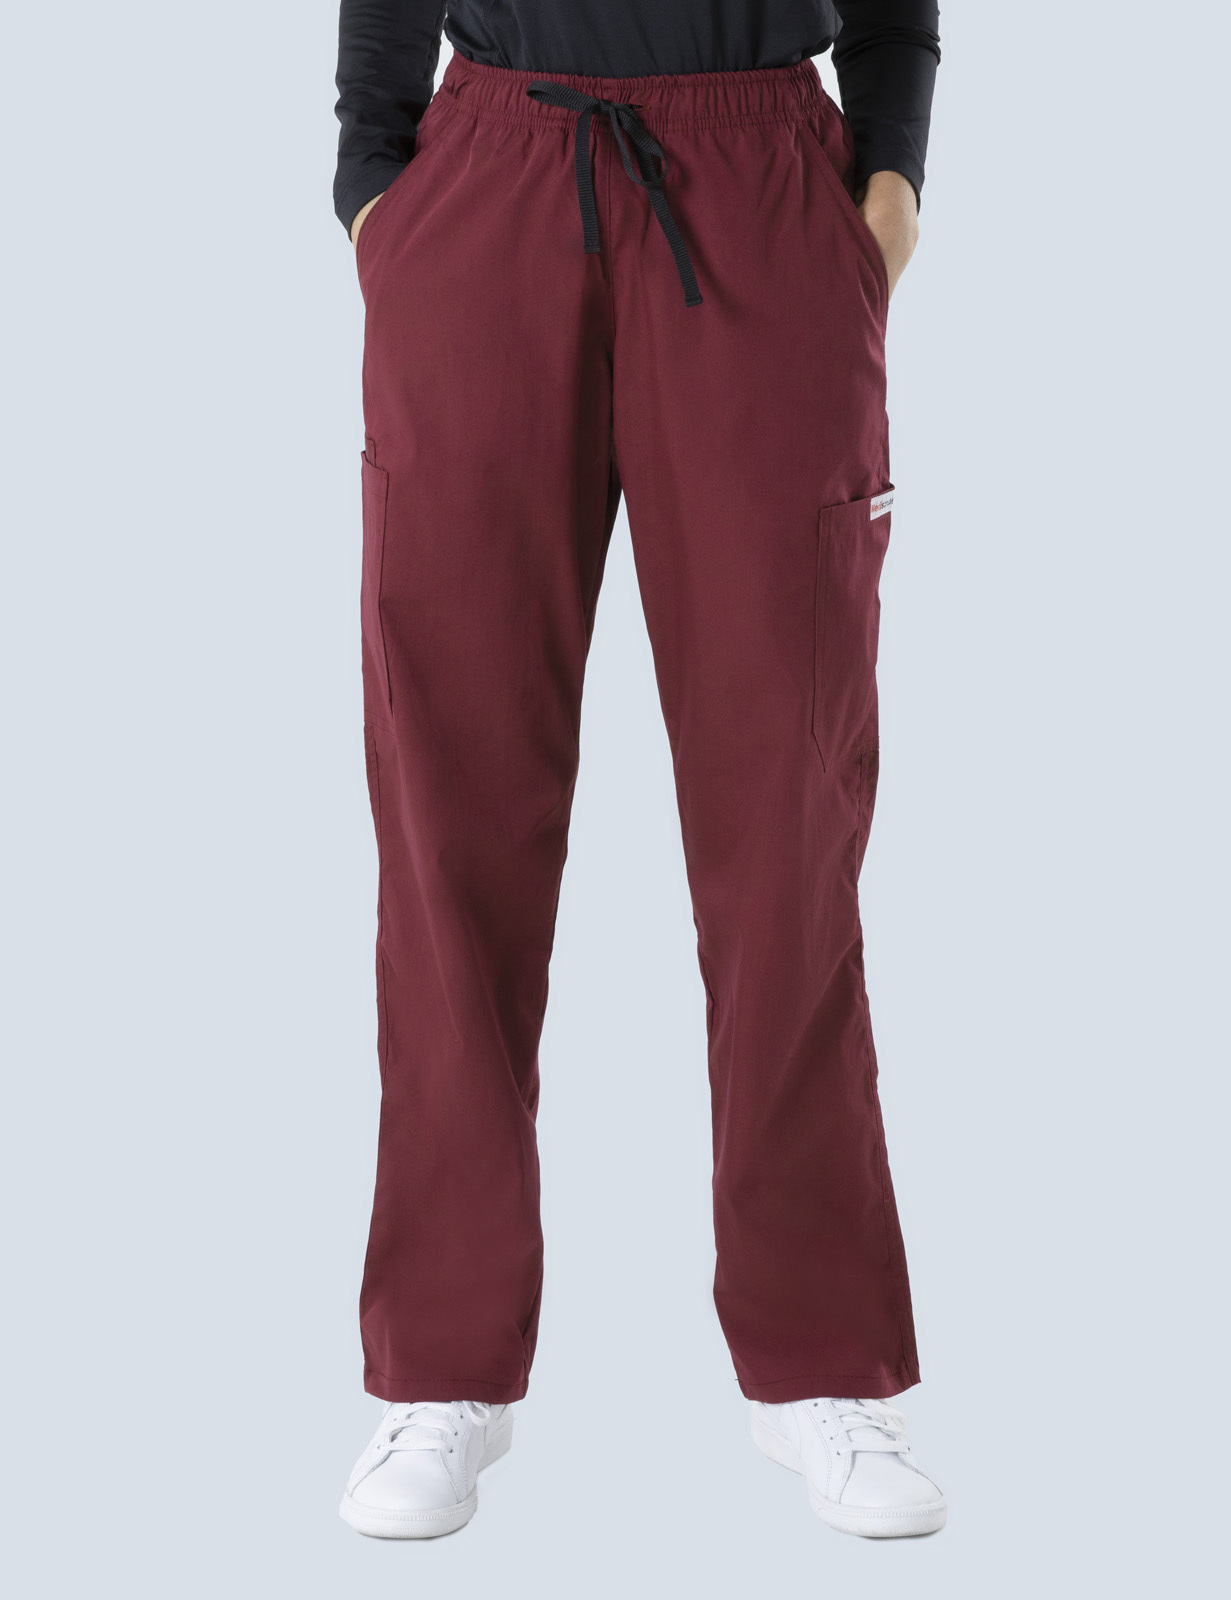 Gympie Hospital - Nursing Practitioner (Women's Fit Solid Scrub Top and Cargo Pants in Burgundy incl Logos)